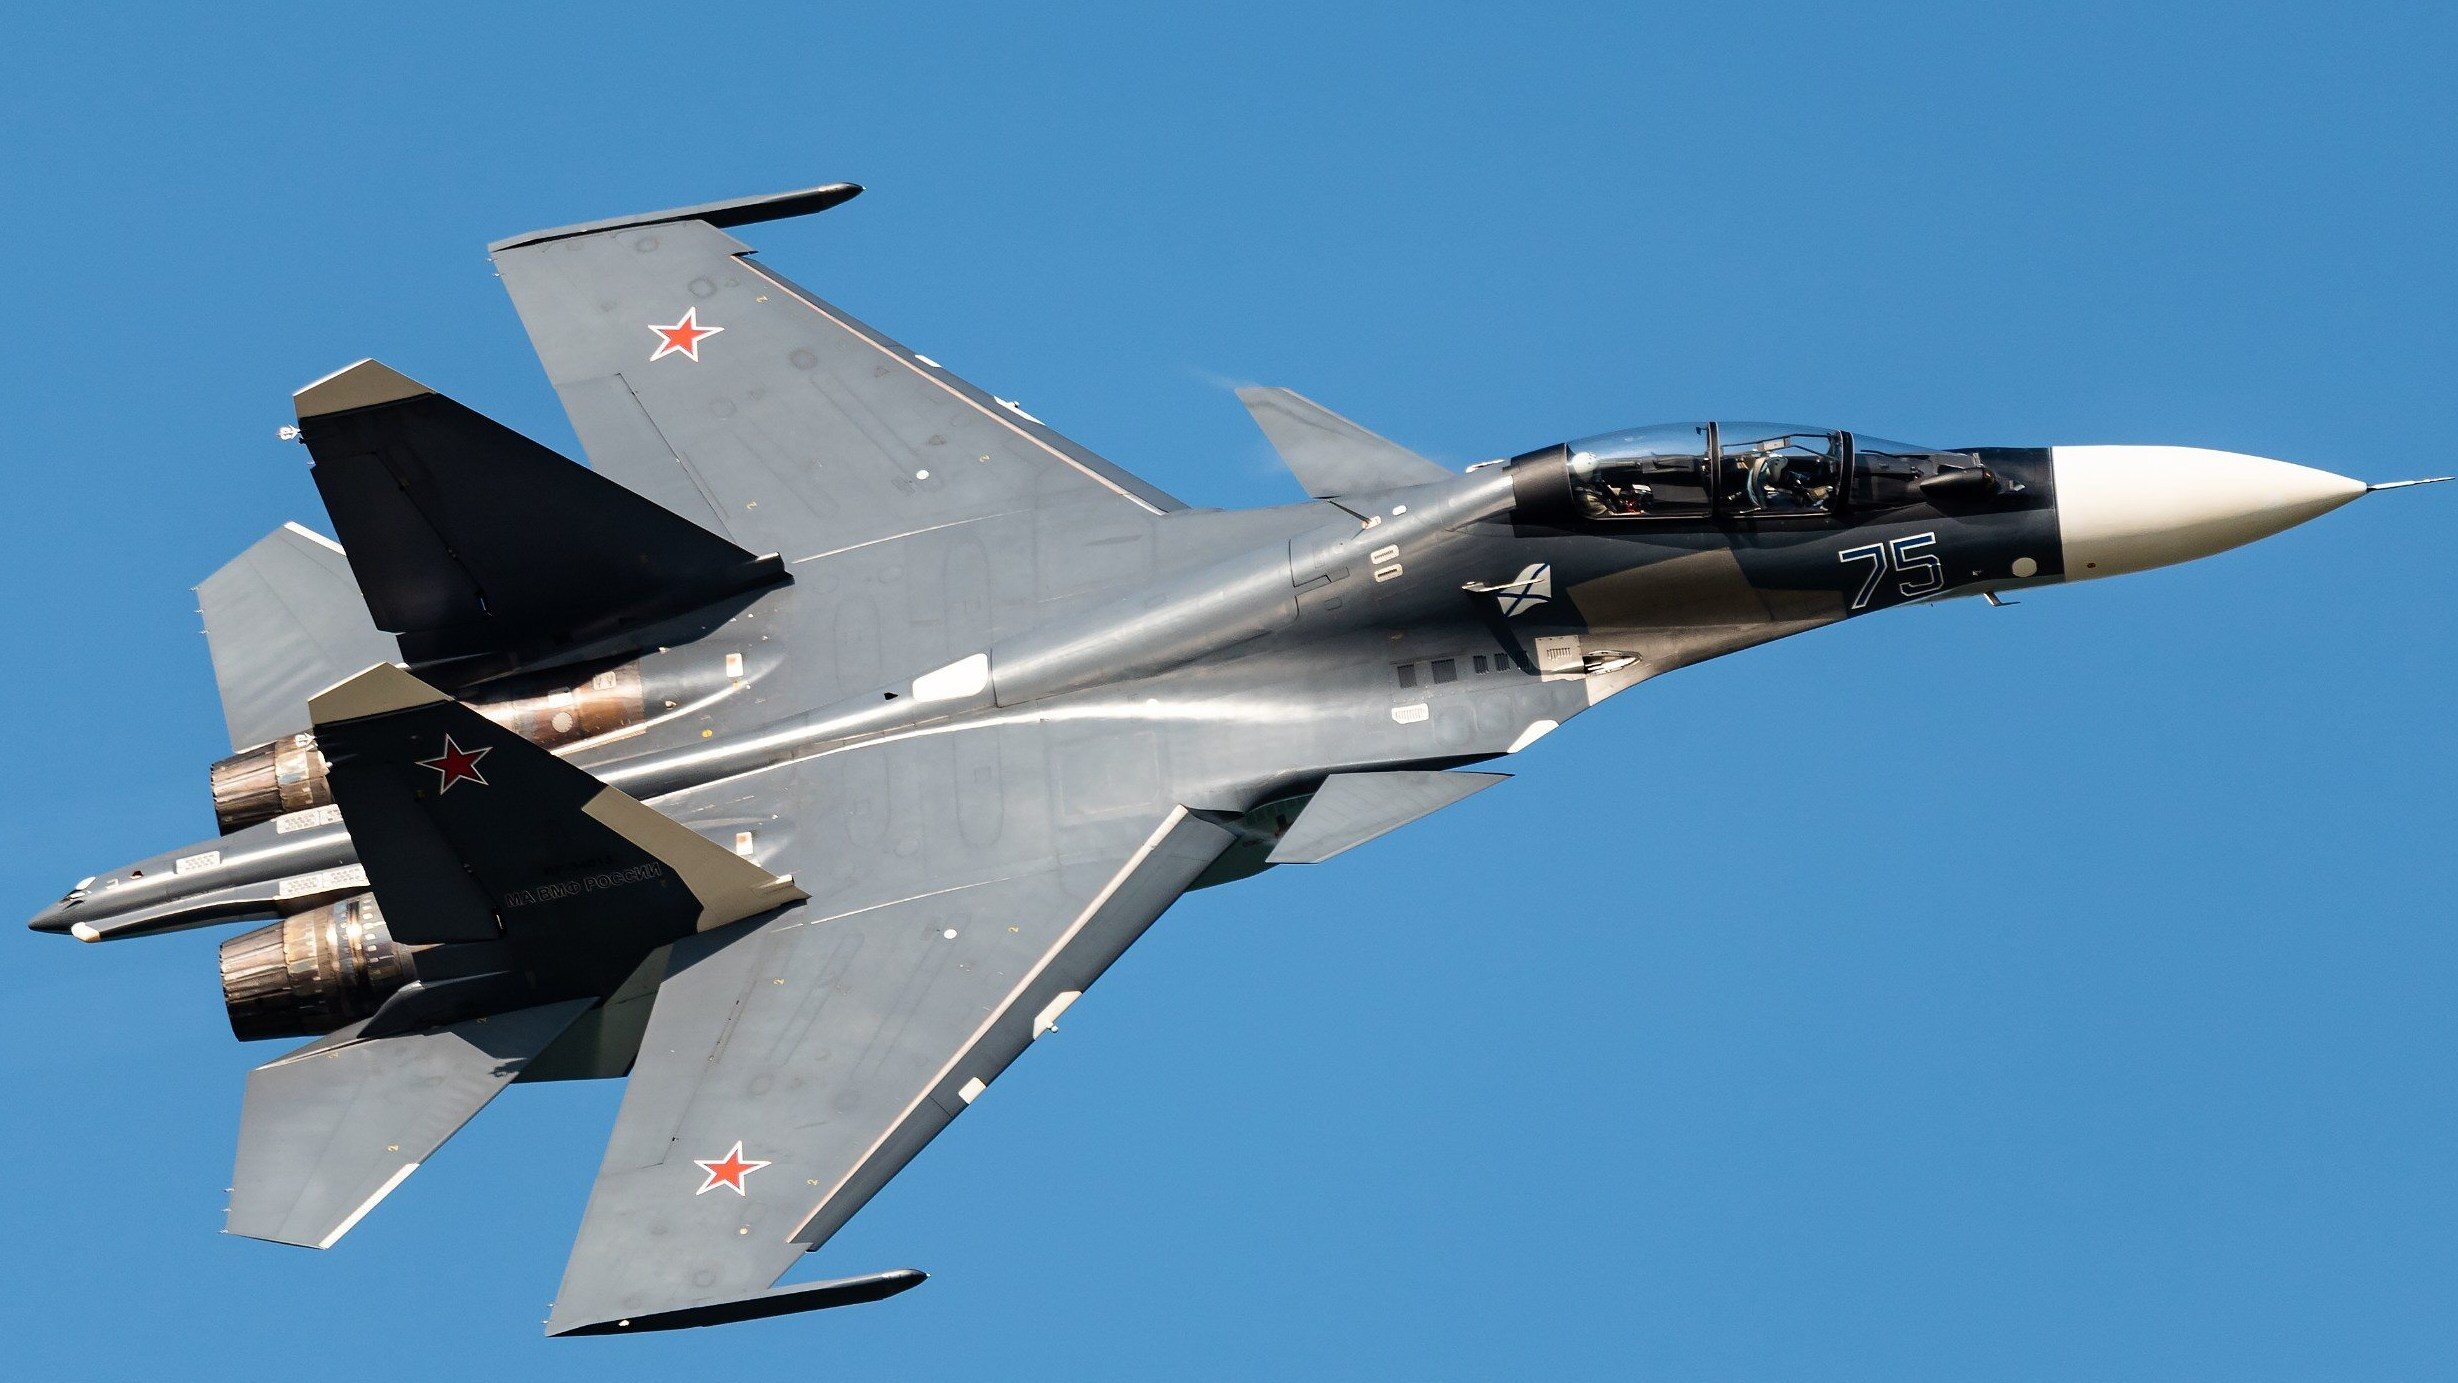 Russia is stockpiling Su-30 fighters in Crimea.  This is one of Putin's most powerful weapons